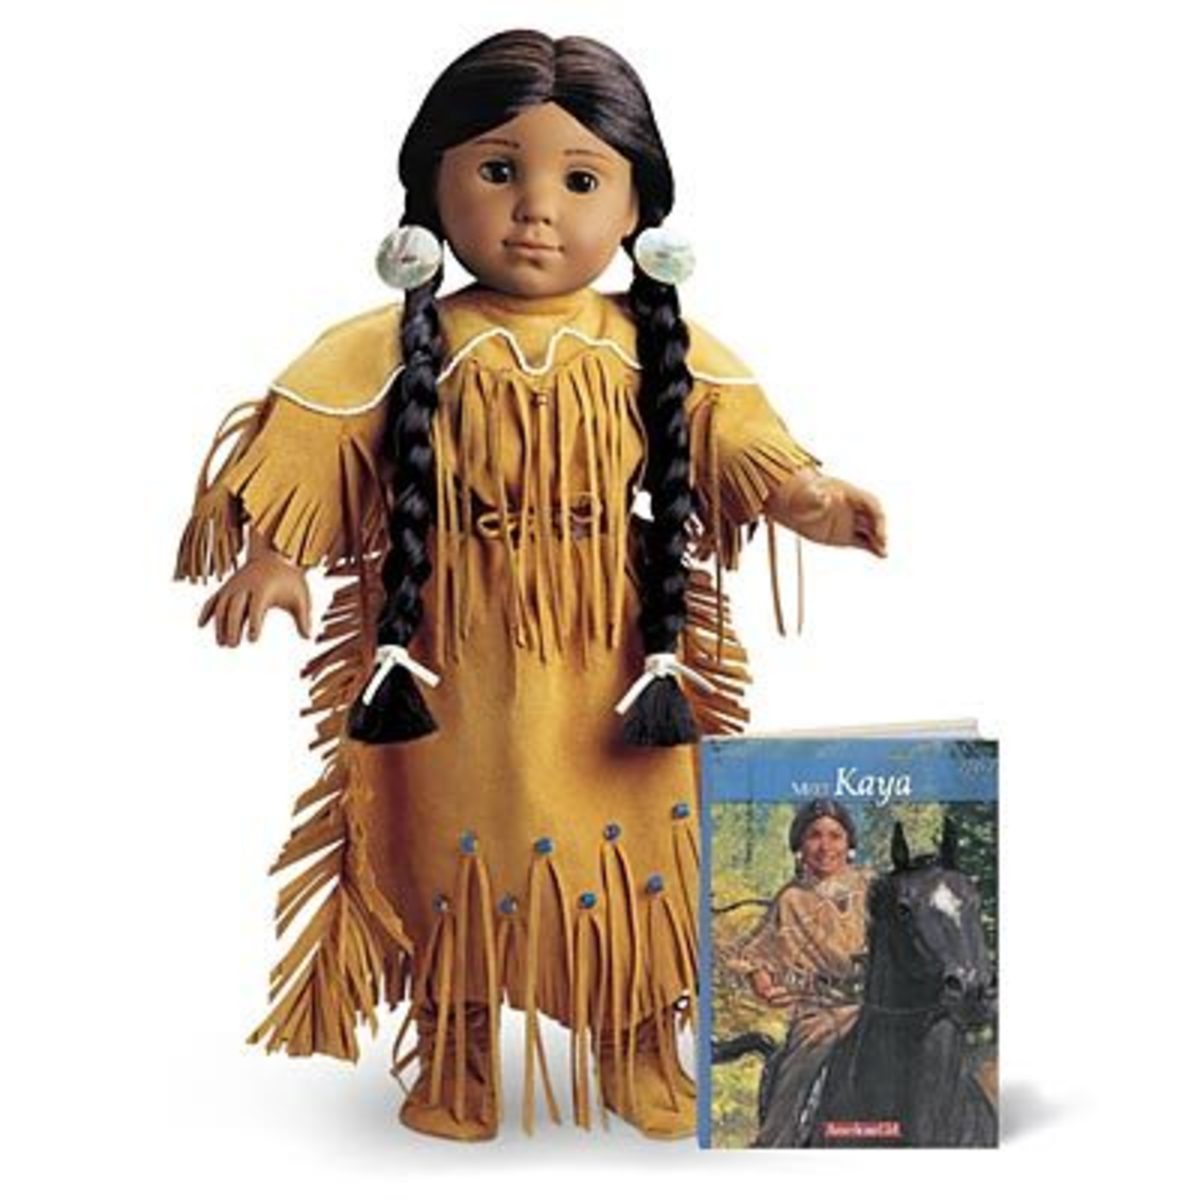 The Kaya doll comes dressed in this “Meet Outfit.”